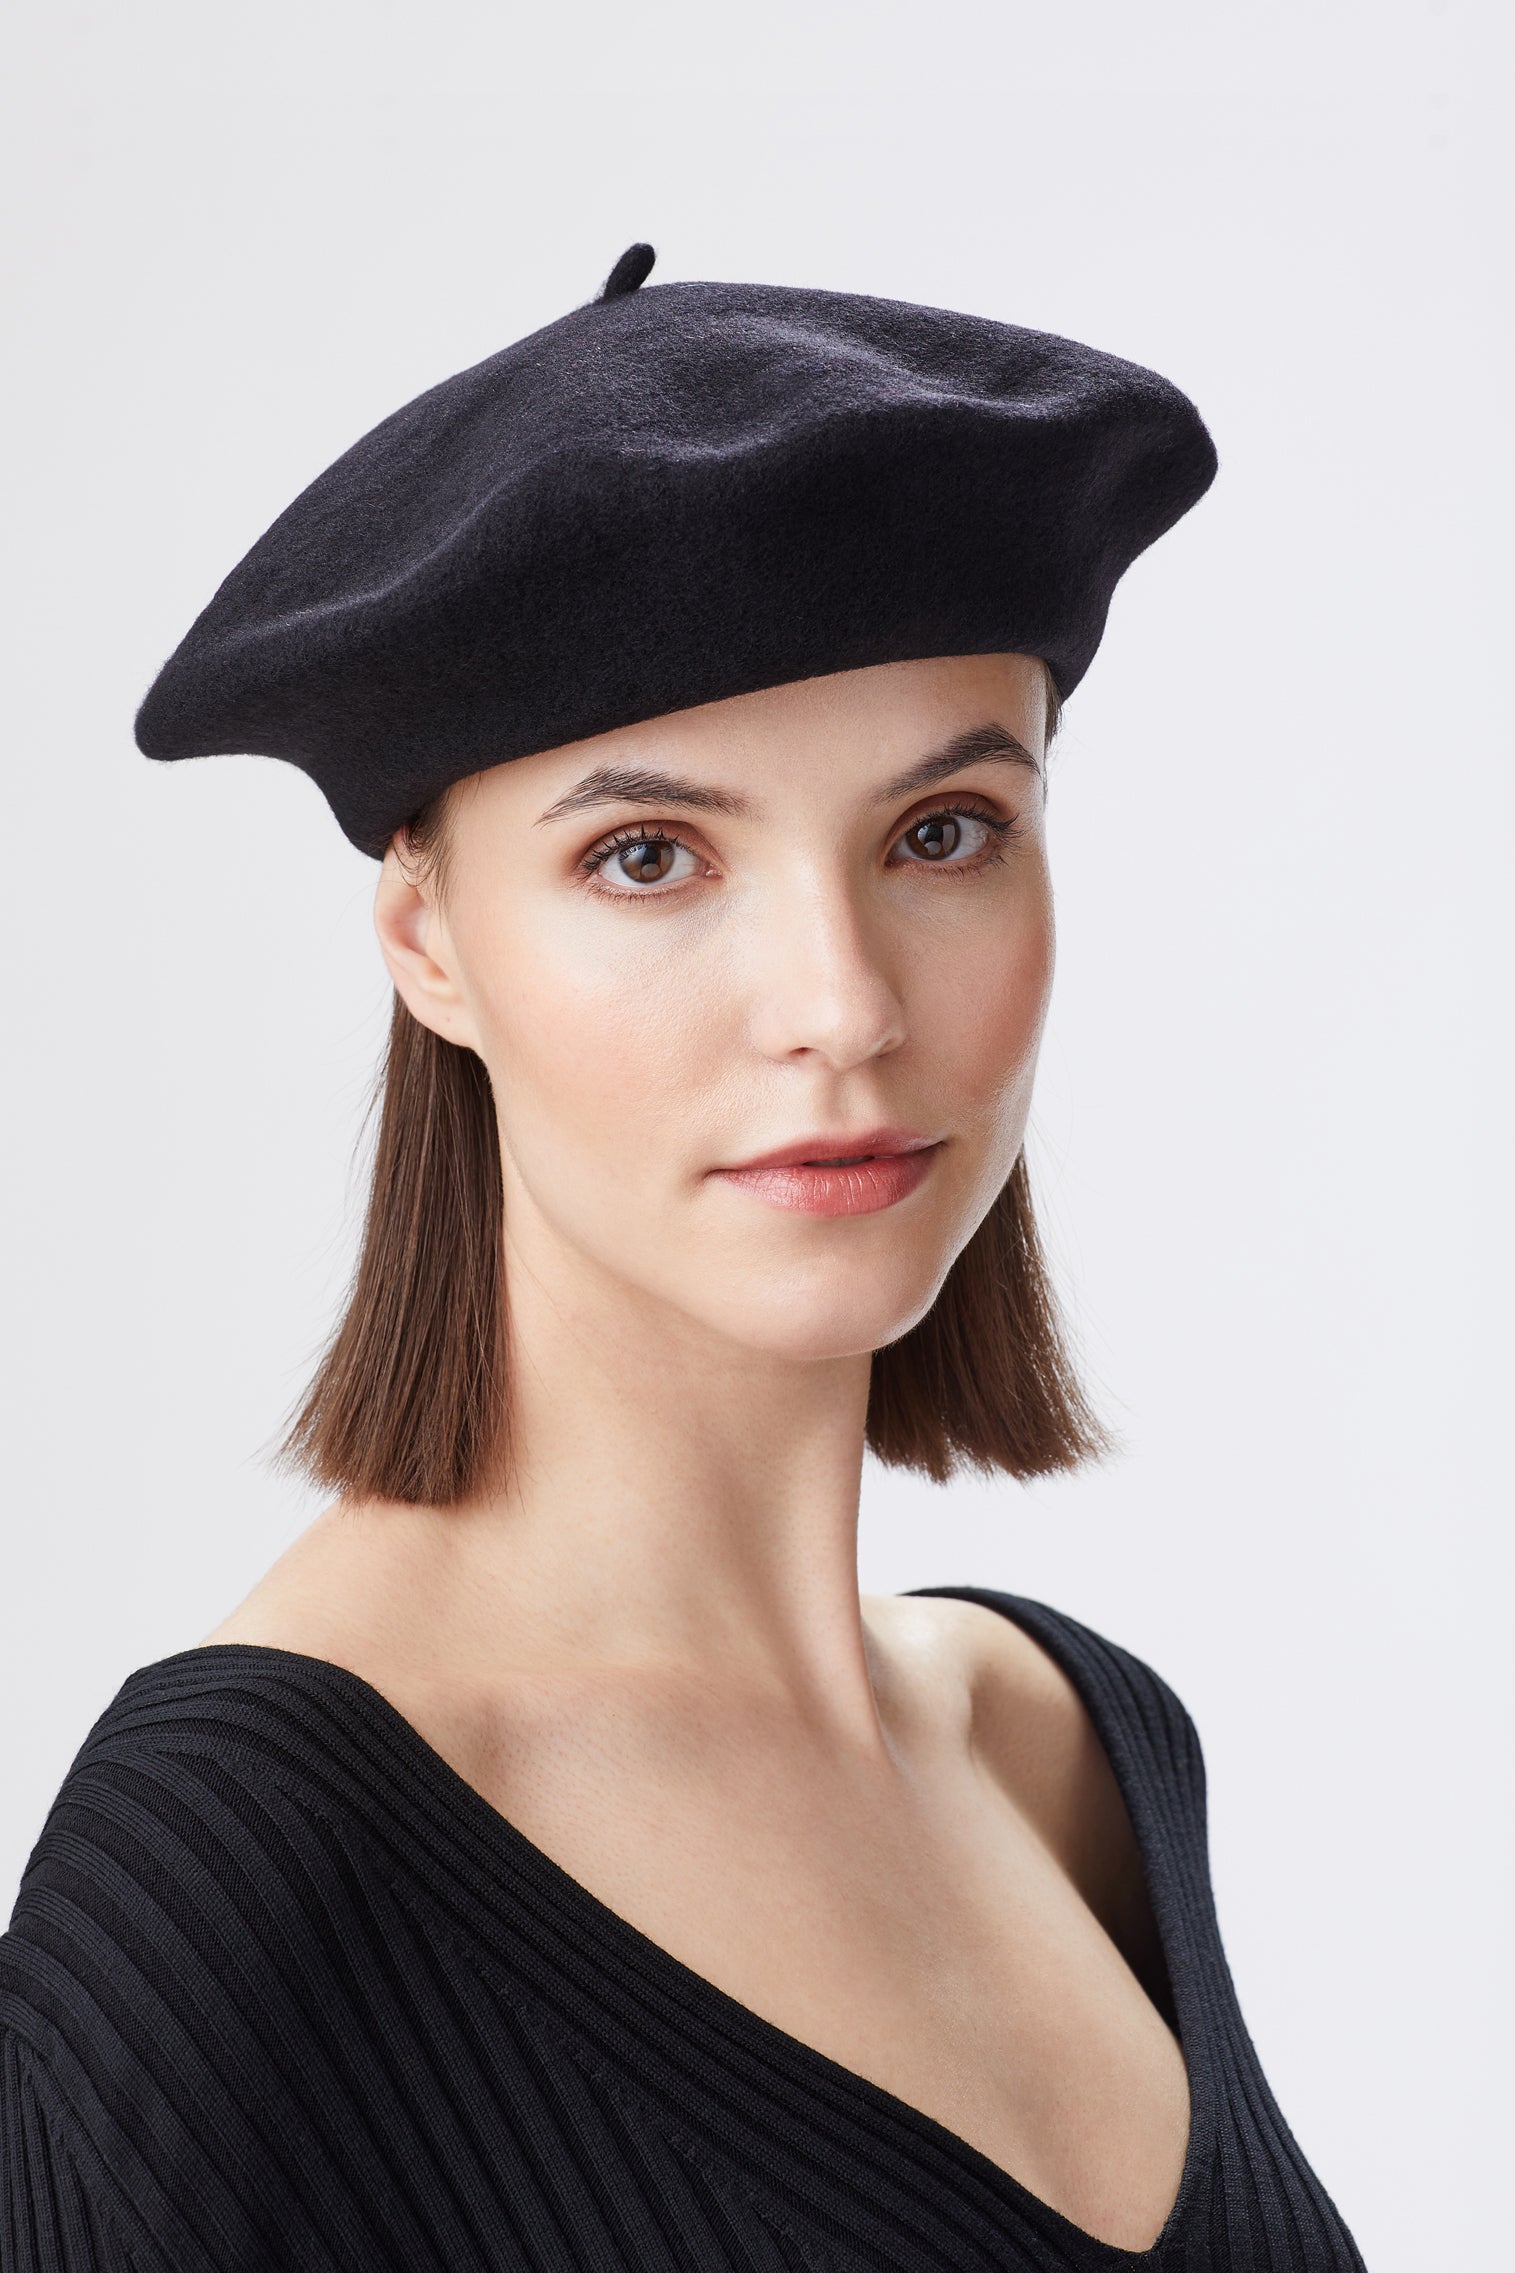 French Beret - Mother's Day Gift Guide - Lock & Co. Hatters London UK